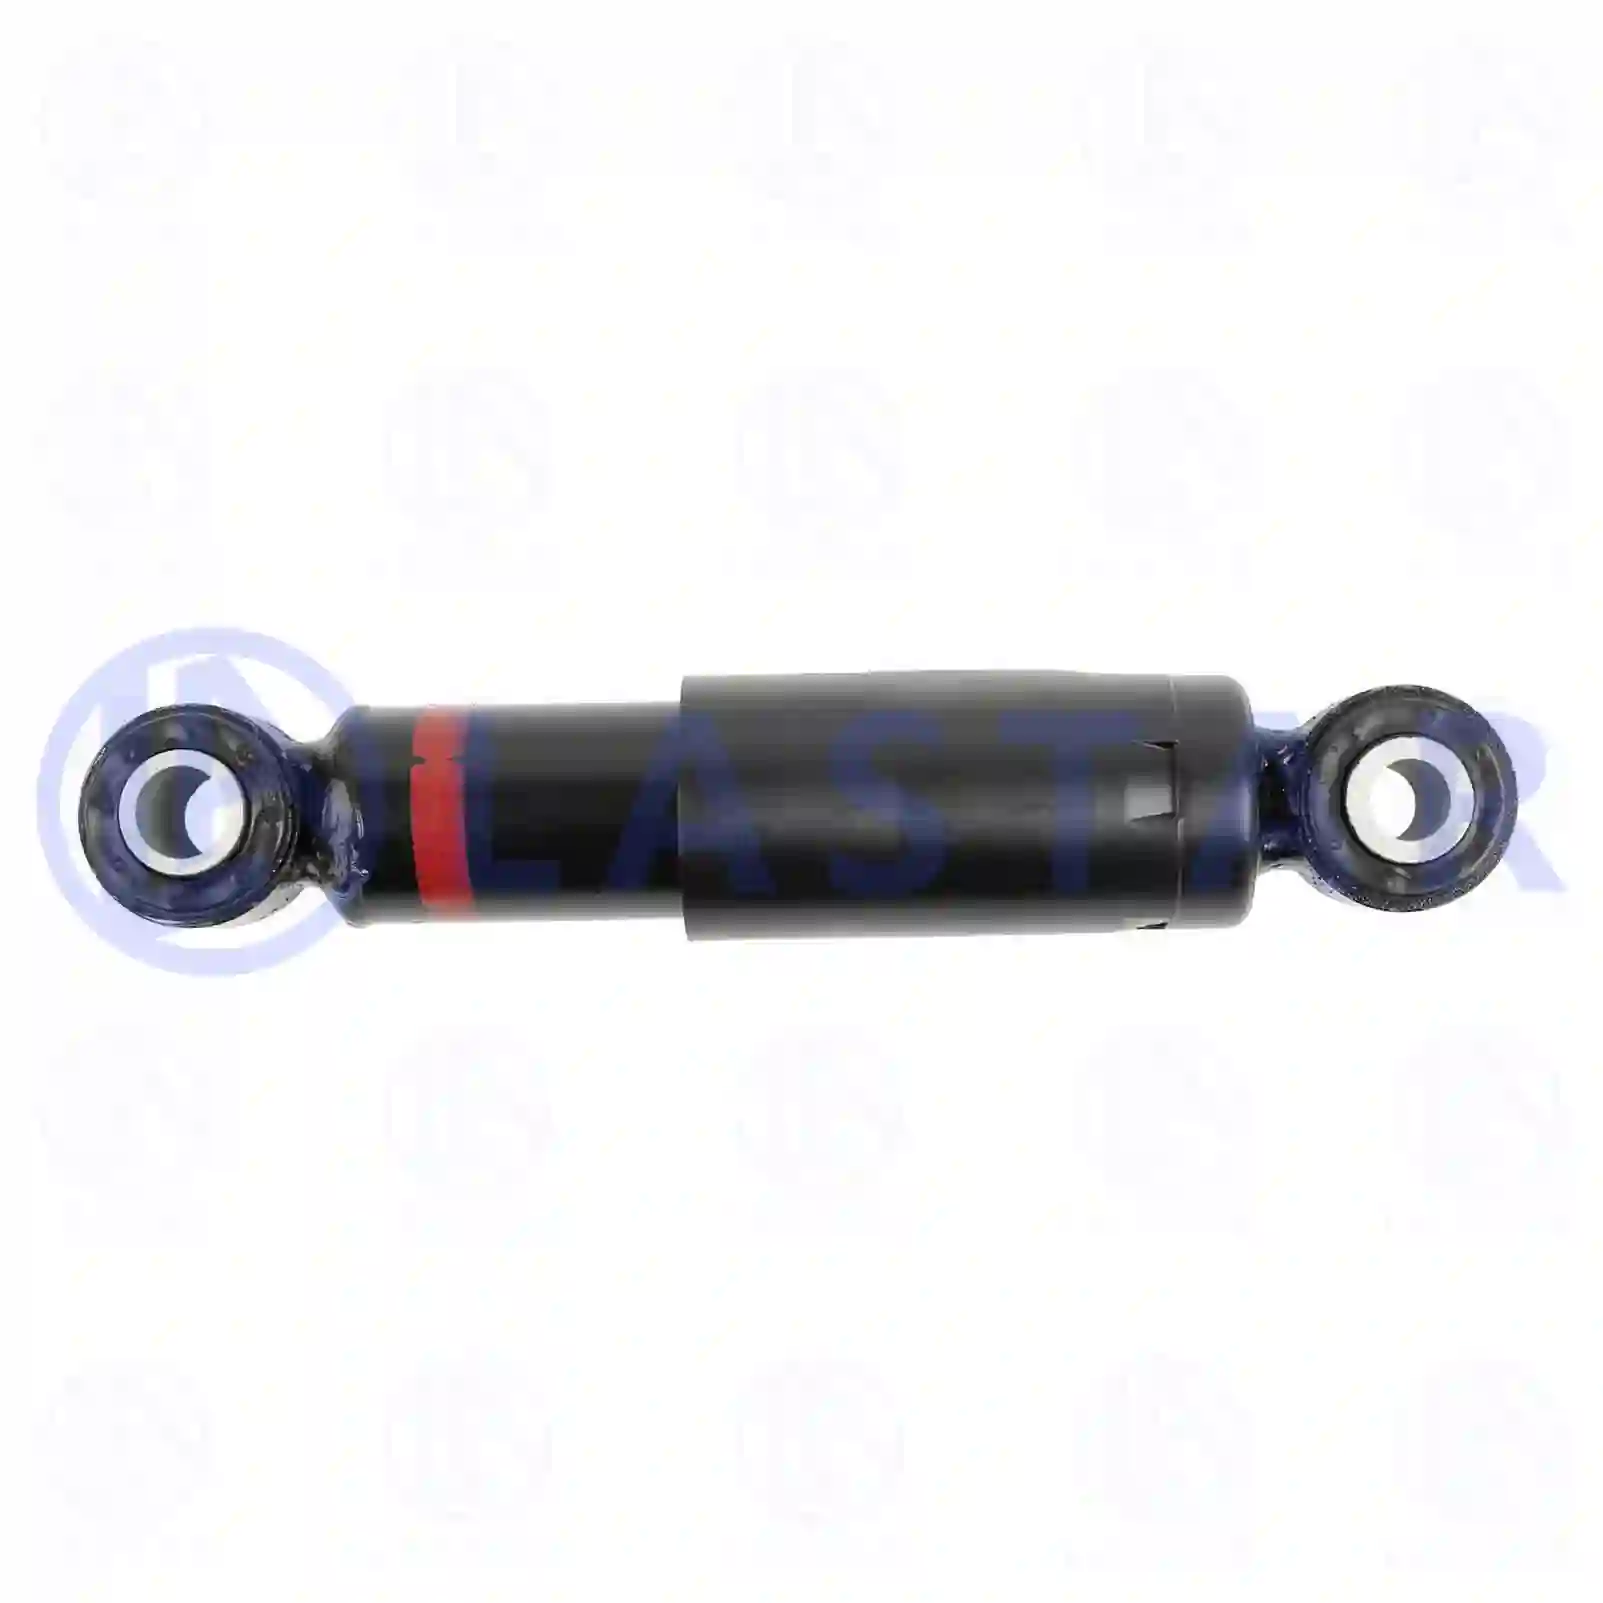 Cabin shock absorber, 77735606, 500348789, 98426021, 98472611, 98487778, 98487780, 99433007, 99433008, 99433009, 99454195, 99454196, 99454197, 08139025, 42555628, 42555629, 500348789, 504228086, 98426021, 98472611, 98487778, 98487780, 99431373, 99431377, 99433007, 99433008, 99433009, 99454195, 99454196, 99454197, 500348789, 98426021, 98472611, 98487778, 98487780, 99433007, 99433008, 99433009, 99454195, 99454196, 99454197 ||  77735606 Lastar Spare Part | Truck Spare Parts, Auotomotive Spare Parts Cabin shock absorber, 77735606, 500348789, 98426021, 98472611, 98487778, 98487780, 99433007, 99433008, 99433009, 99454195, 99454196, 99454197, 08139025, 42555628, 42555629, 500348789, 504228086, 98426021, 98472611, 98487778, 98487780, 99431373, 99431377, 99433007, 99433008, 99433009, 99454195, 99454196, 99454197, 500348789, 98426021, 98472611, 98487778, 98487780, 99433007, 99433008, 99433009, 99454195, 99454196, 99454197 ||  77735606 Lastar Spare Part | Truck Spare Parts, Auotomotive Spare Parts